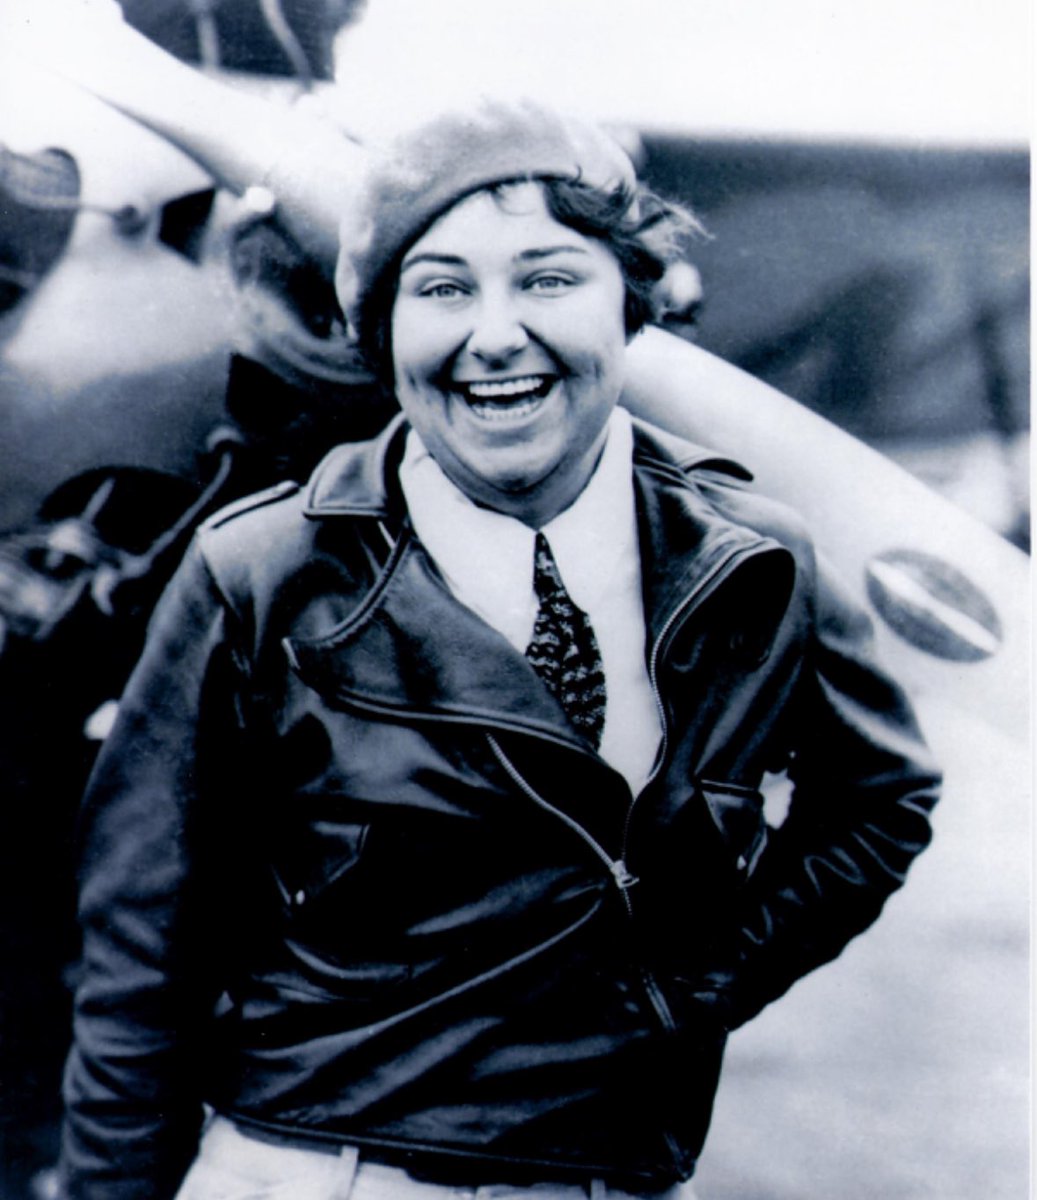 🛩️✨ Celebrating Women's History Month: Meet Pancho Barnes ✨🛩️ Born in 1901, Florence Leontine Lowe, known as Pancho Barnes, defied all odds to become a legend in American aviation. #unitedstatesairforce #airforcetestcenter Full story here: bit.ly/3VuYMQD